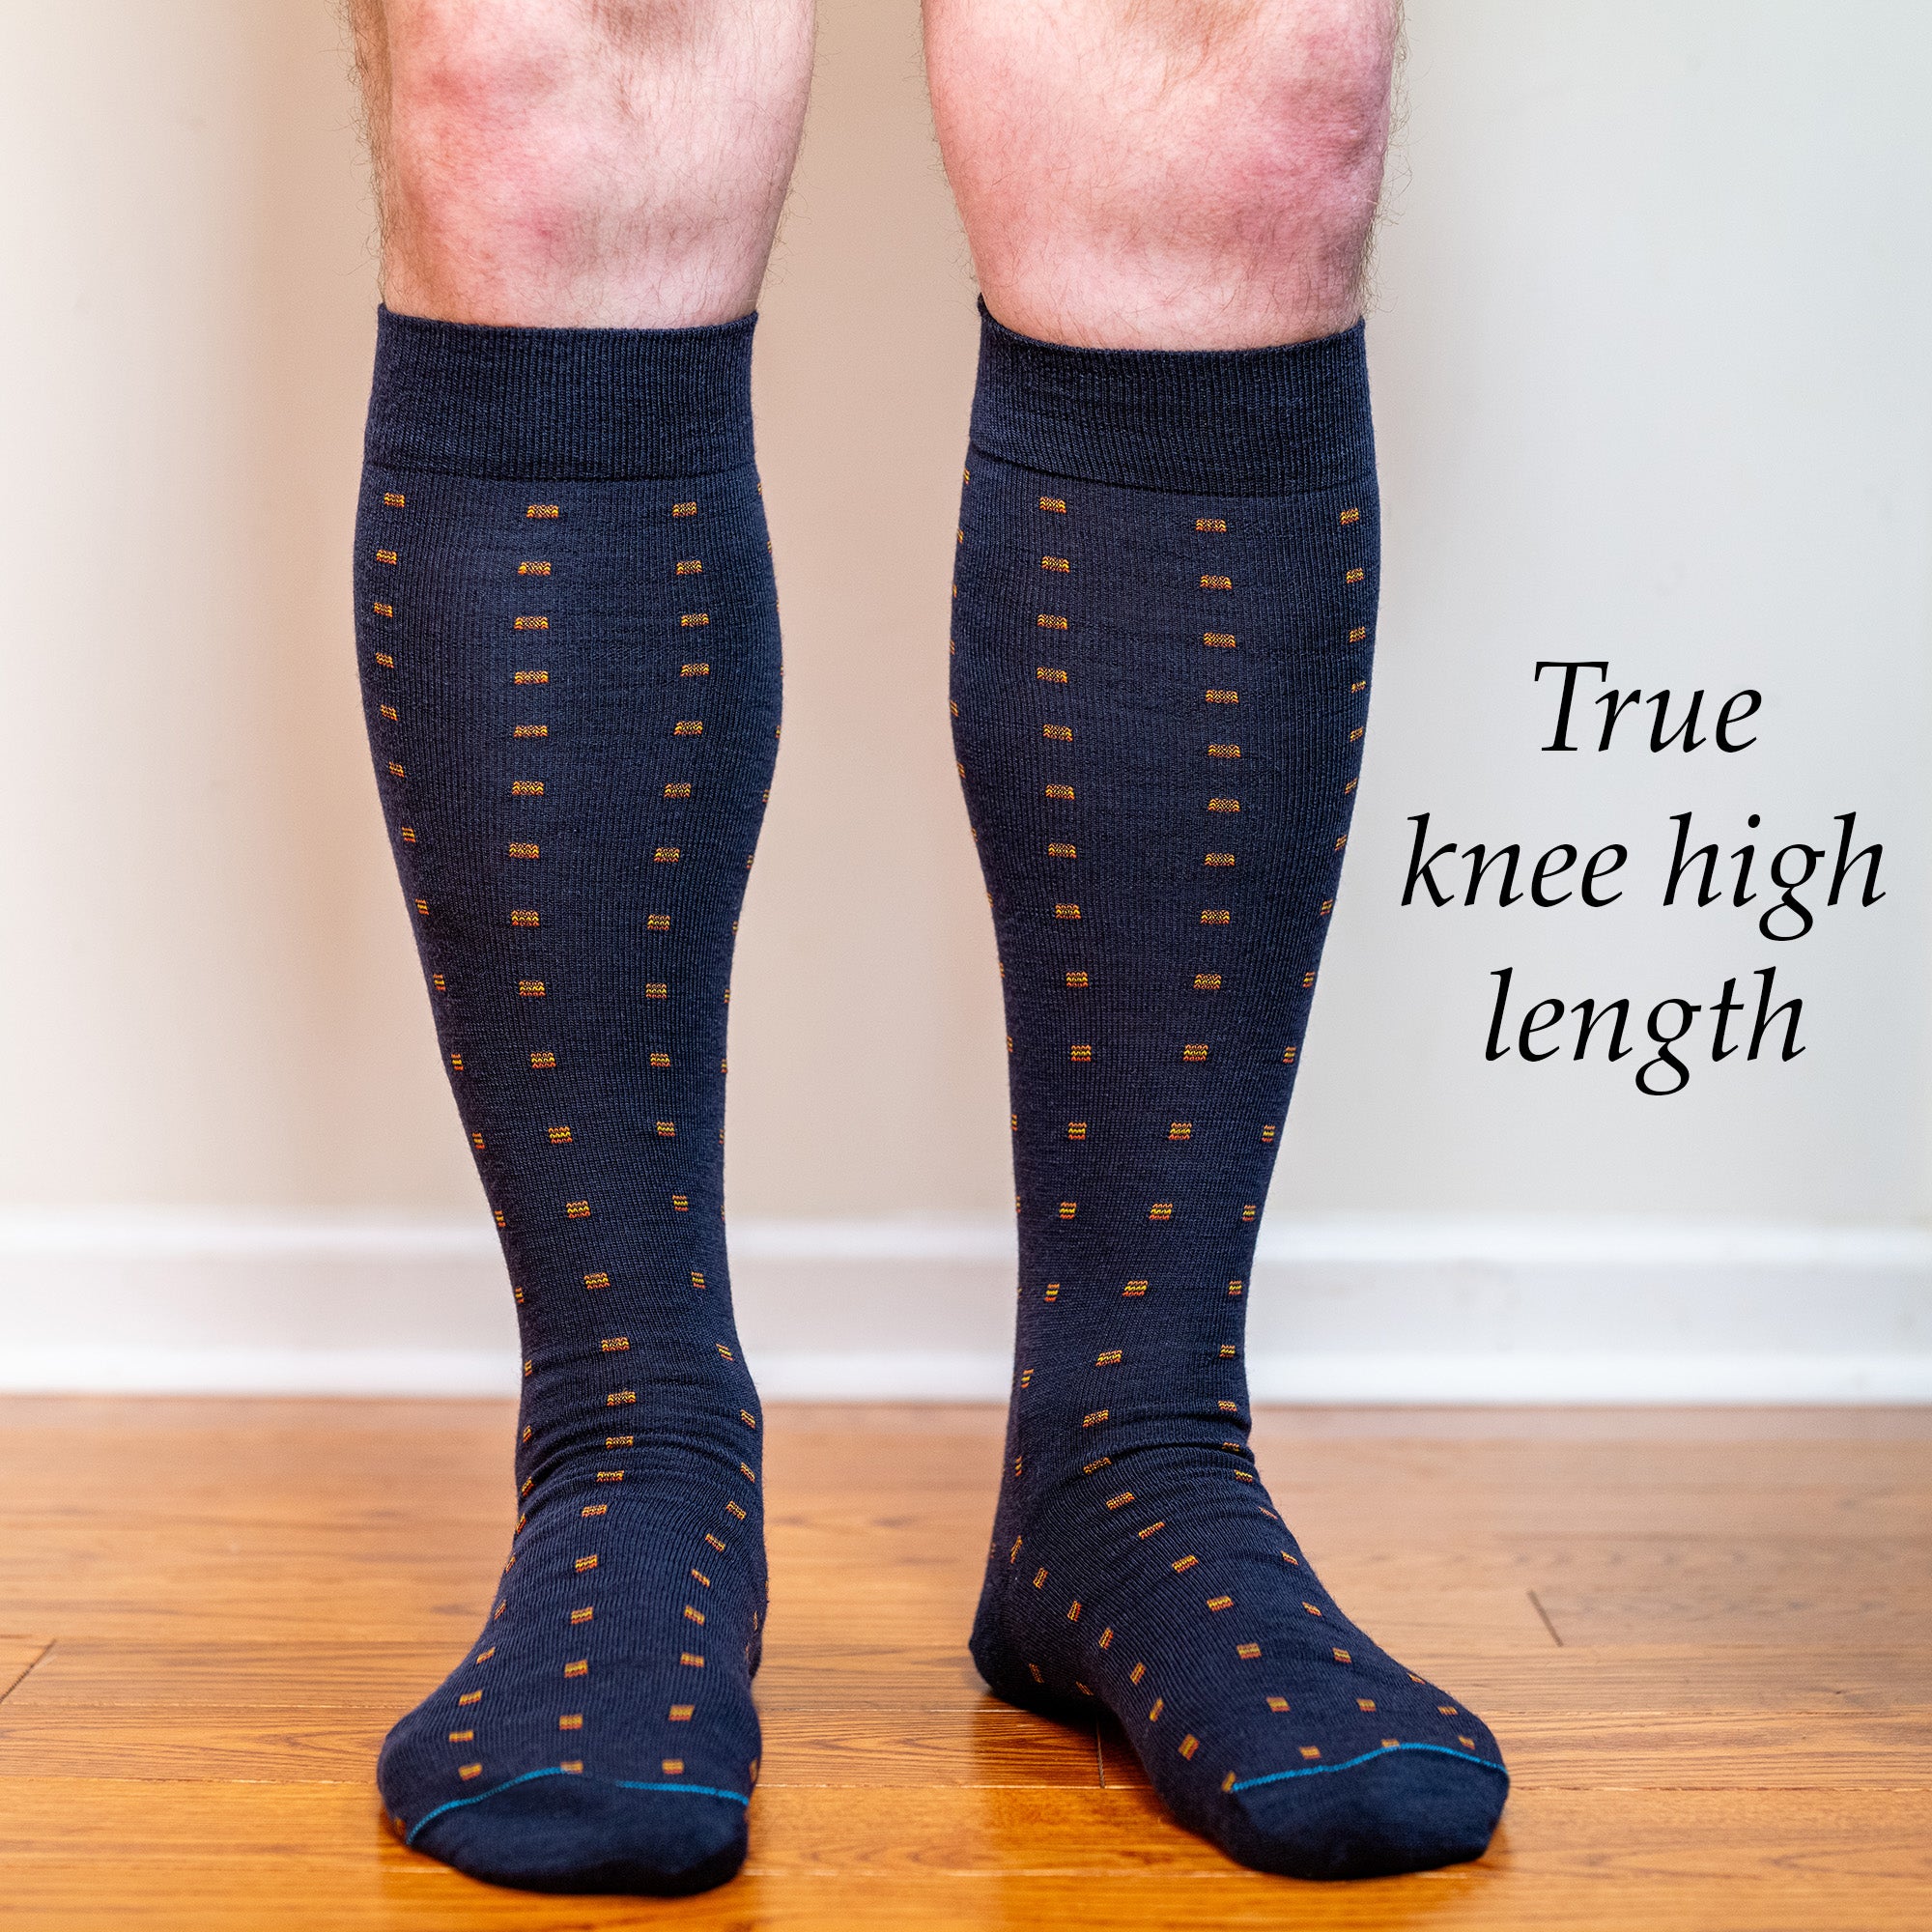 Knee High Socks for Men: Which are the Best? - Boardroom Socks